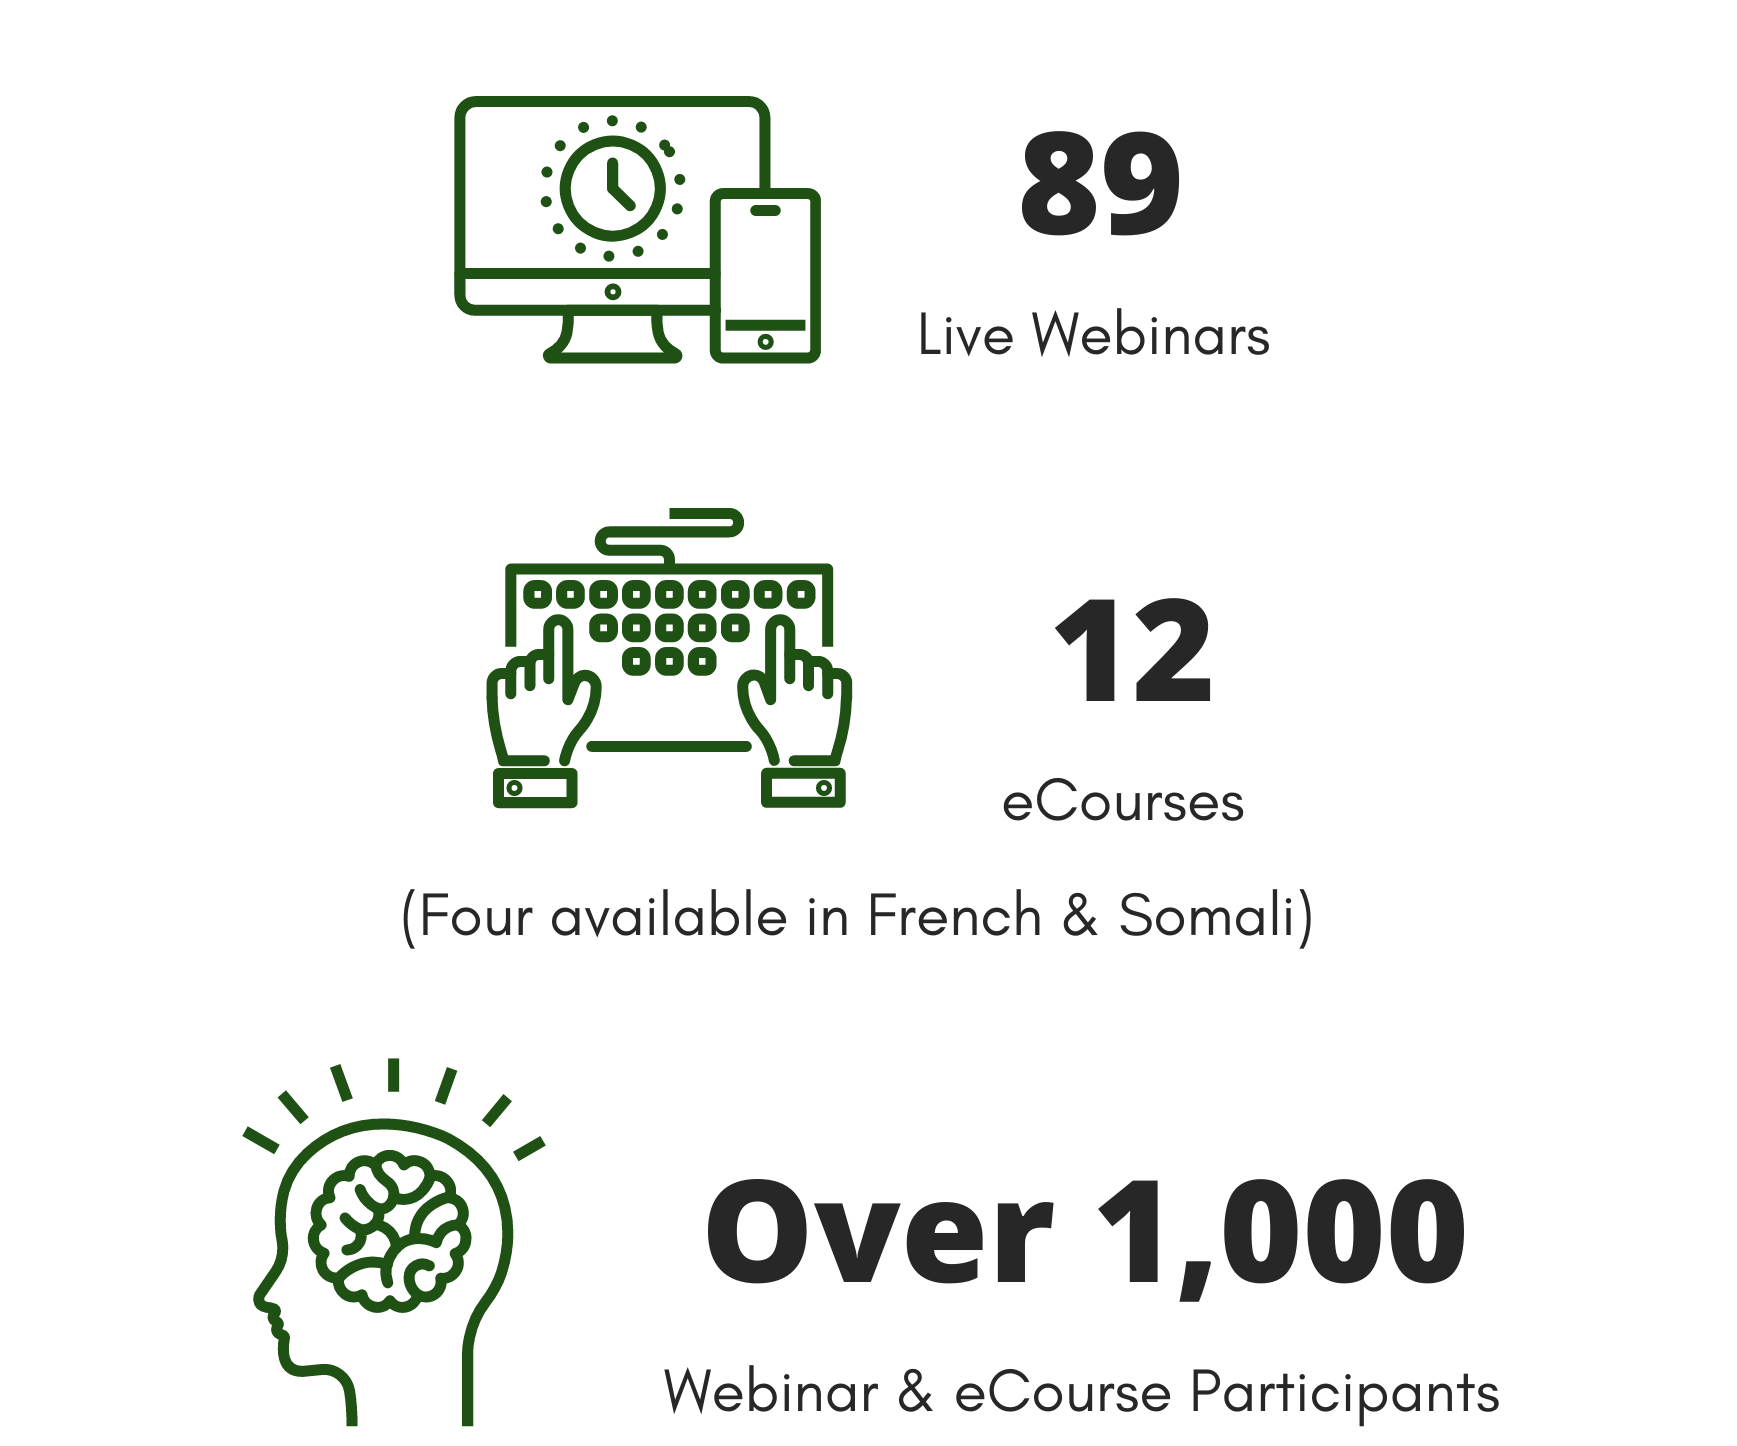 89 Live webinars, 12 e-courses (4 available in French & Somali), and over 1000 webinar and e-course particpants